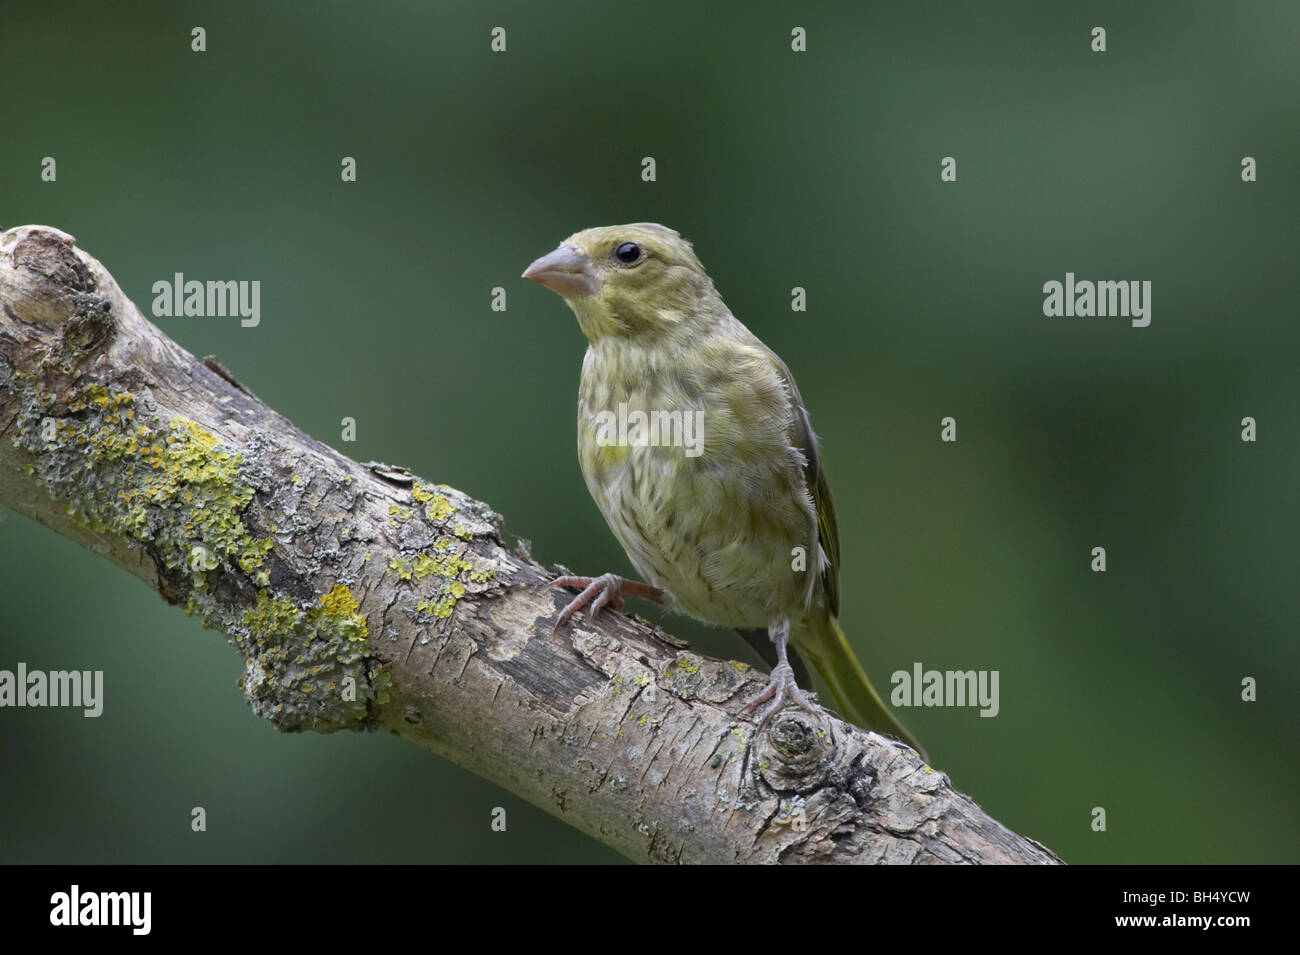 Immature male greenfinch (Carduelis chloris) on branch. Stock Photo